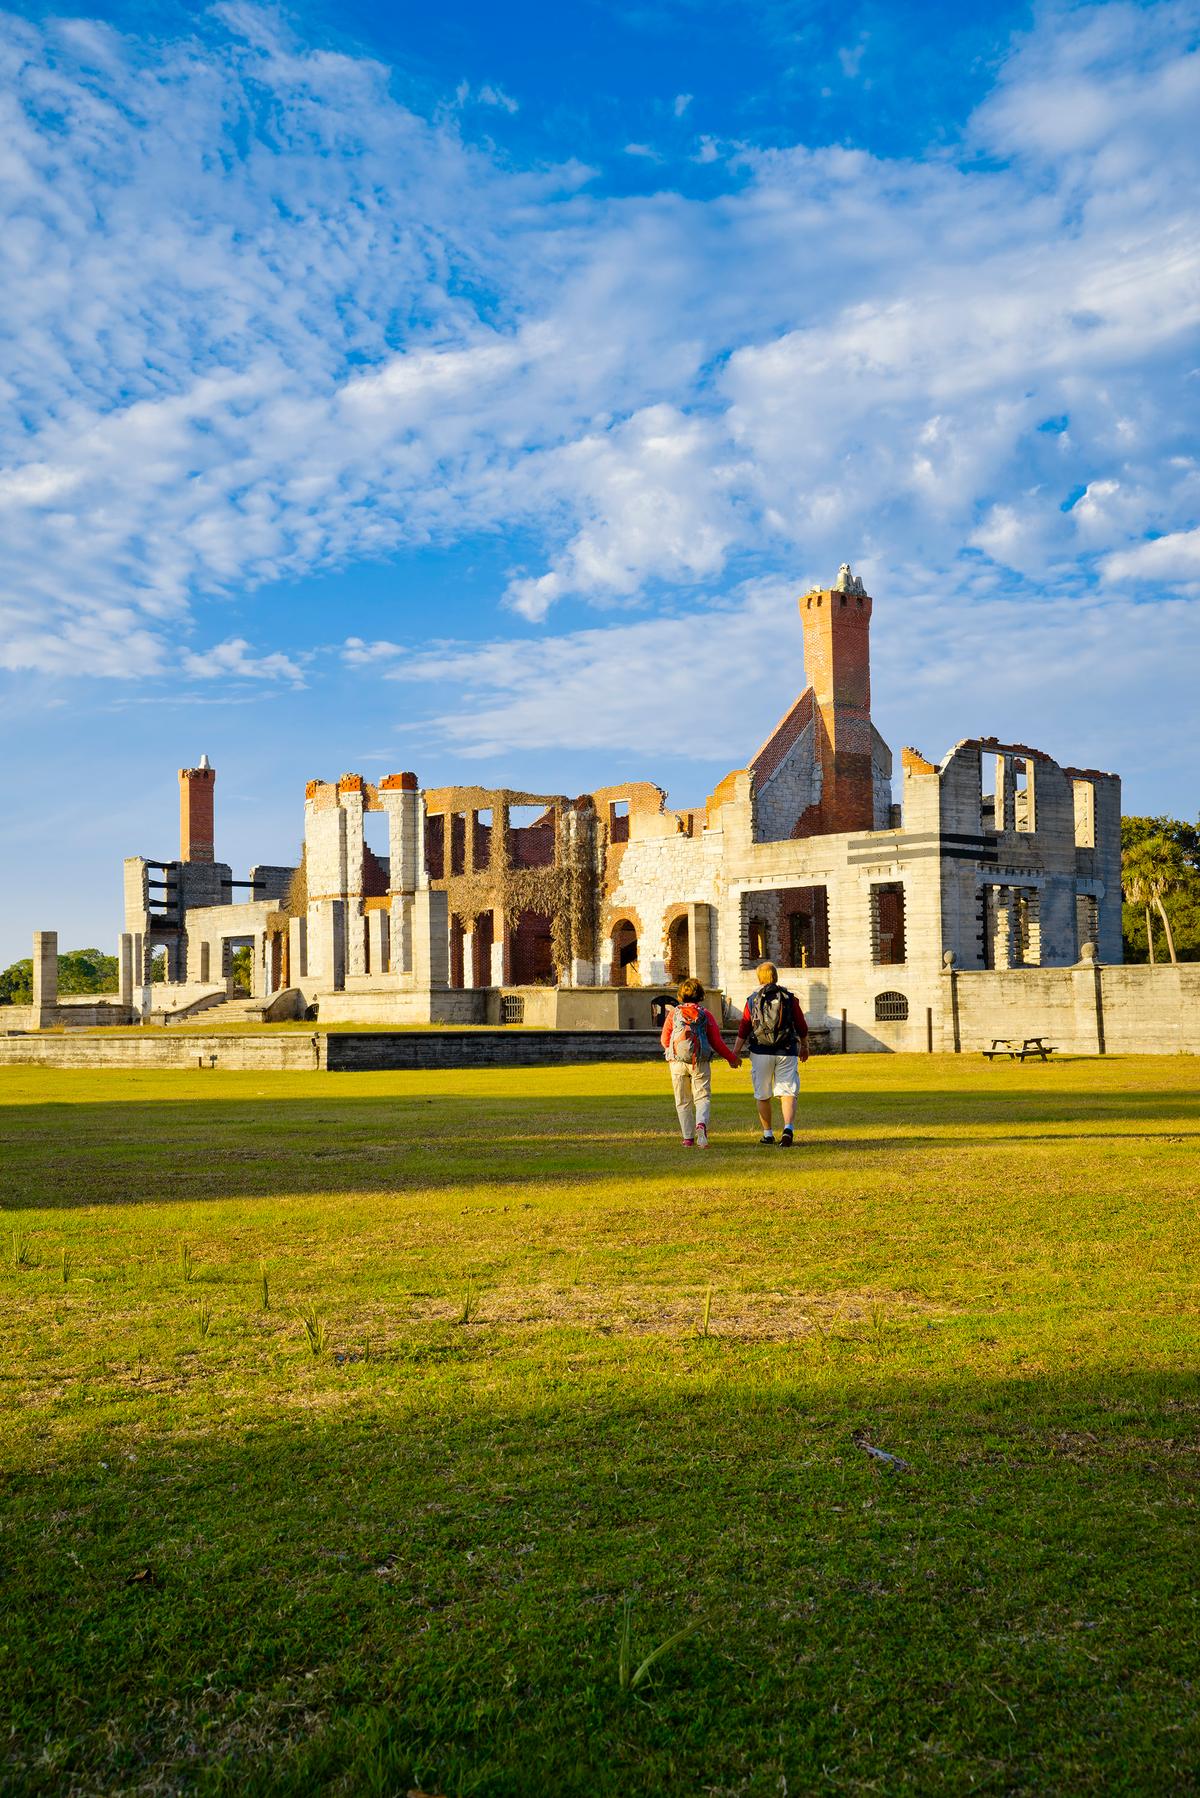 The remains of Thomas Carnegie’s once resplendent mansion, Dungeness, are among the must-see places to visit on Cumberland Island. Once a 44-room, 40-building monolith that resembled a Scottish castle, it burned in 1959 and was never rebuilt. (Ralph Daniel/Explore Georgia/TNS)